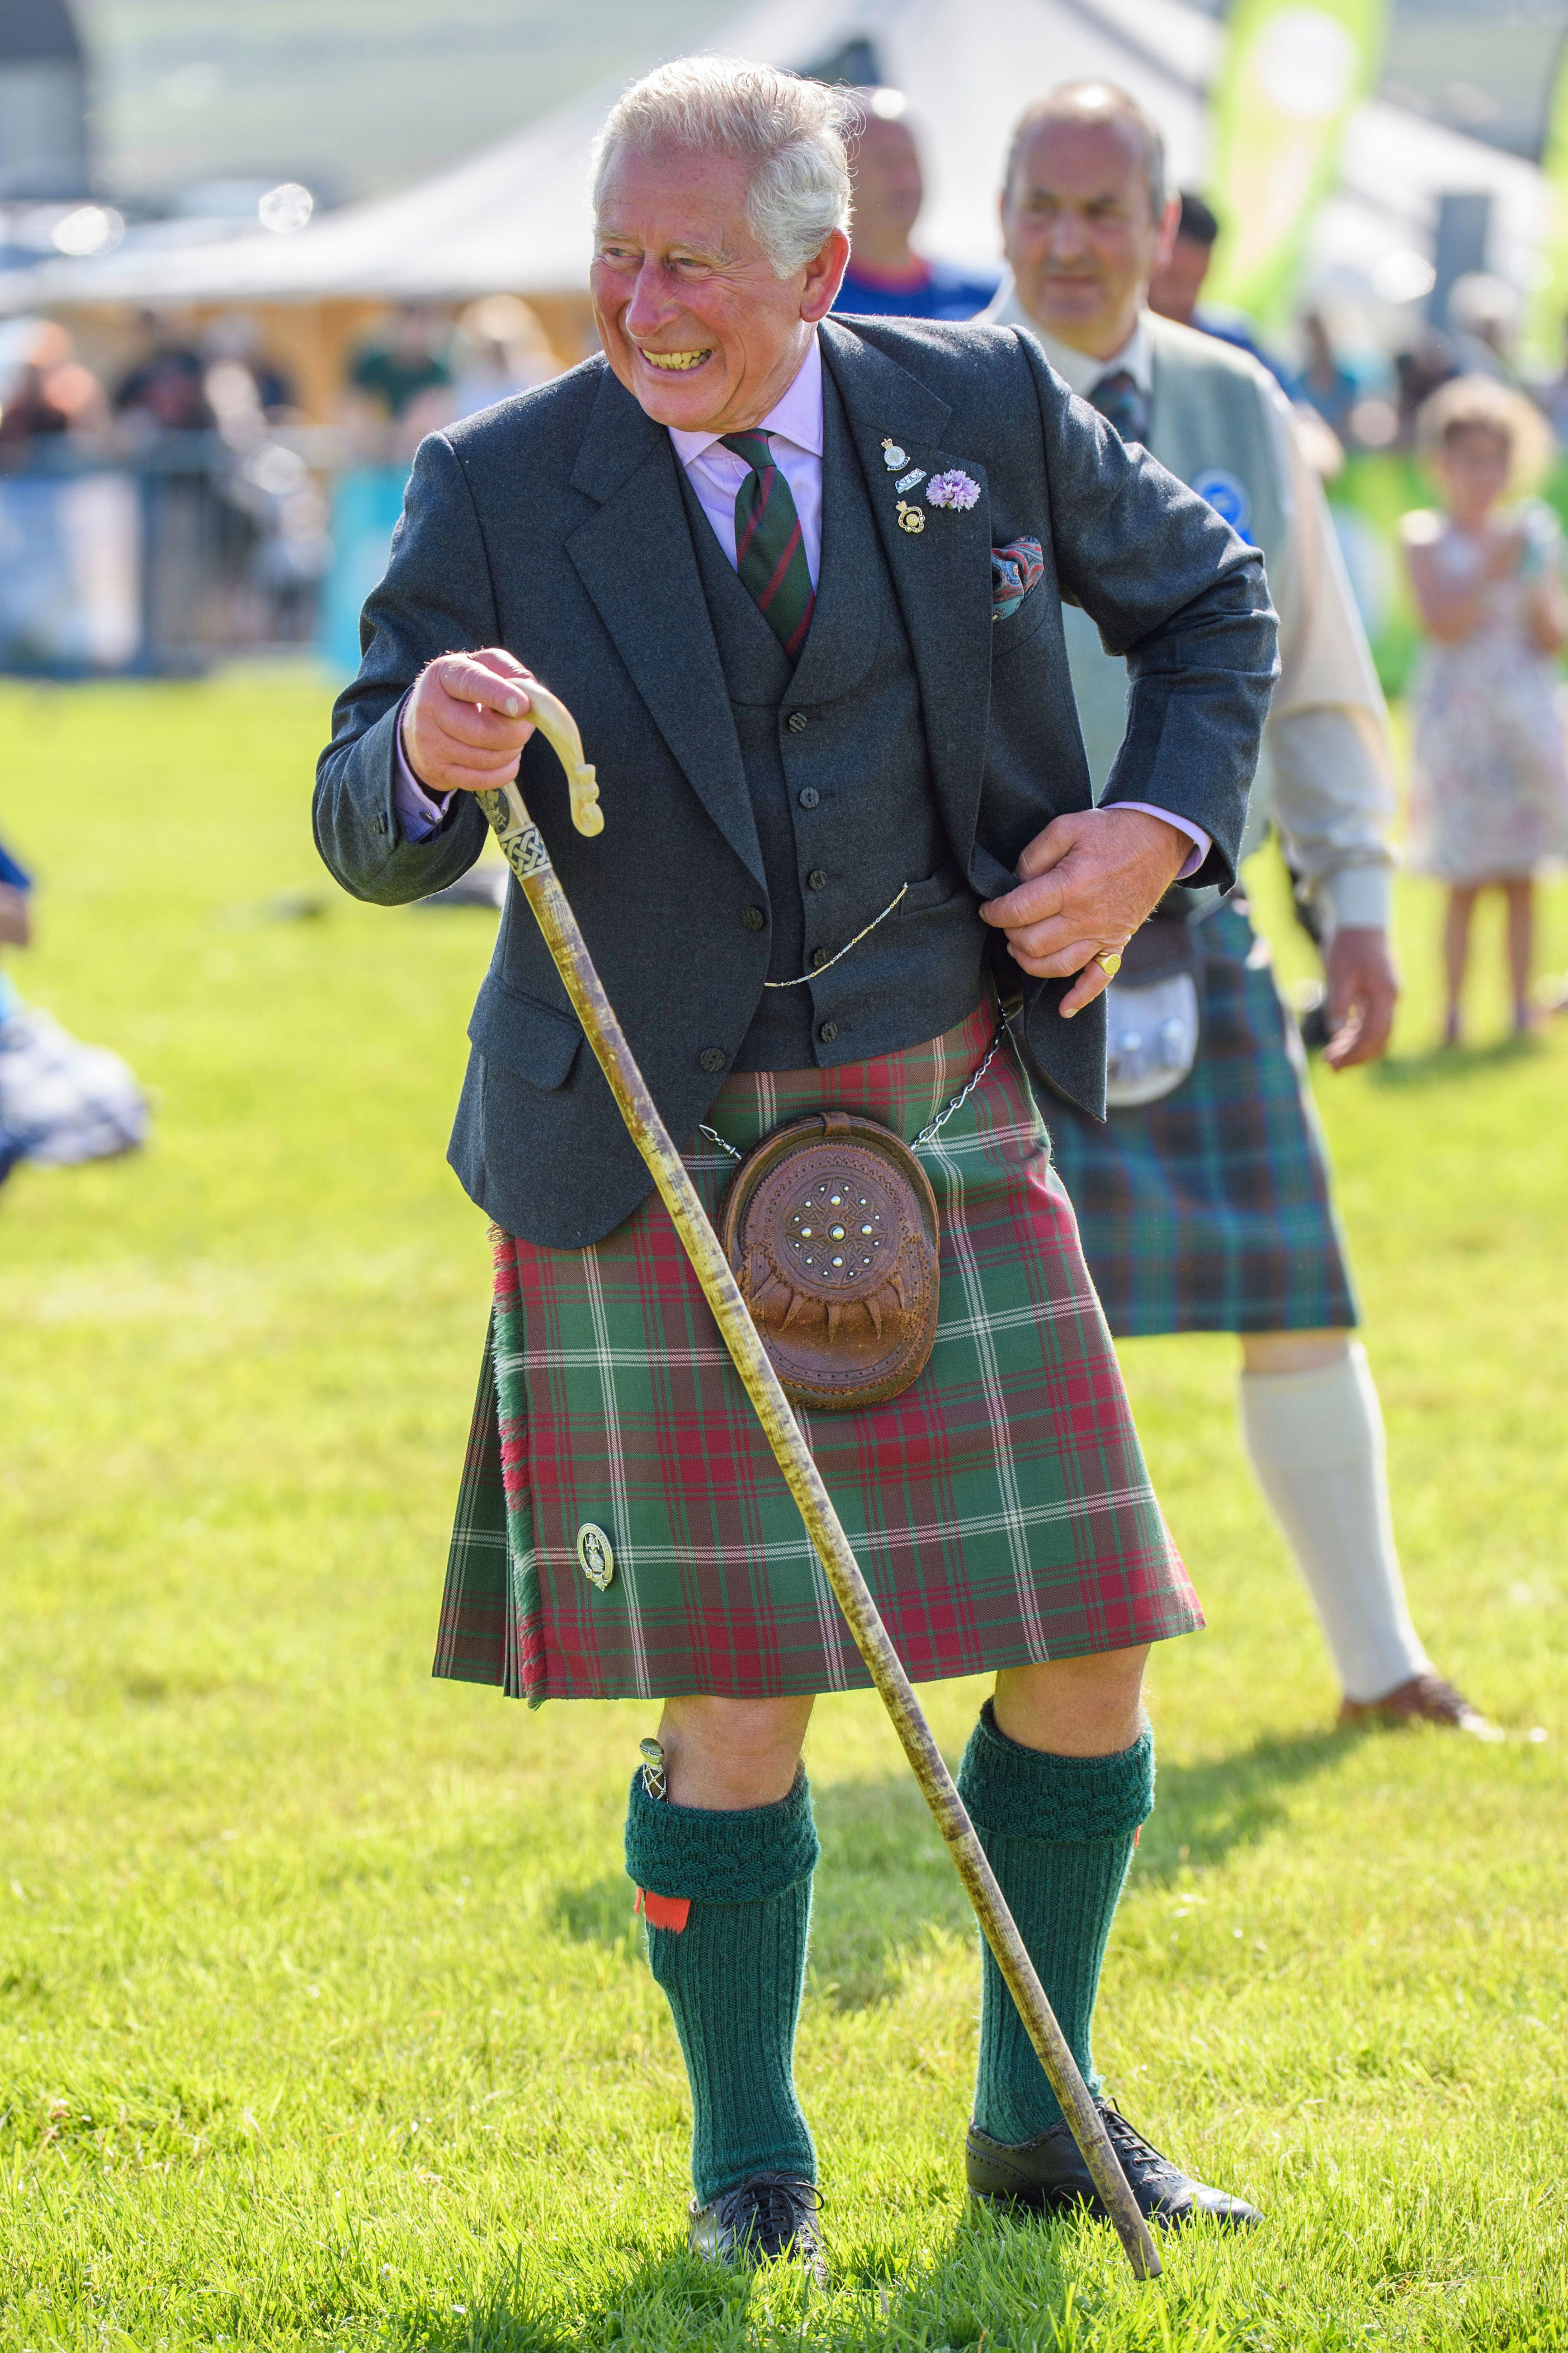 <p>Prince Charles had a laugh at the Mey Highland Games at the John O'Groats showground in Scotland on Aug. 3, 2019. But it certainly wasn't his first time at a highland games competition...</p>